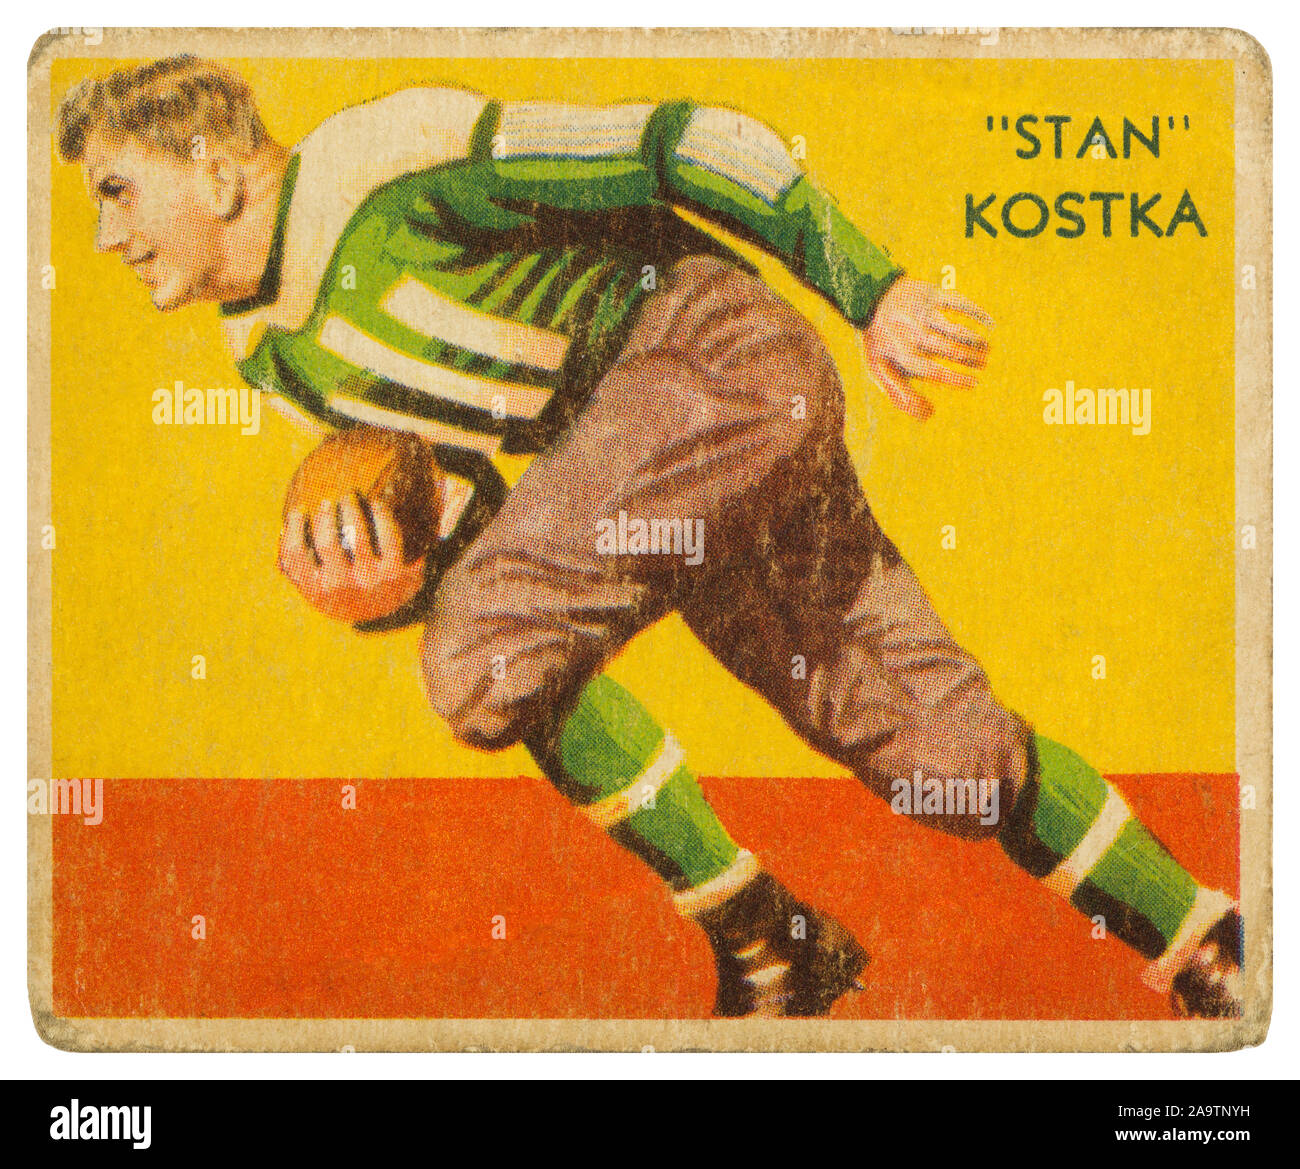 Former University of Minnesota football player Stan Kostka on a 1935 National Chicle Co. football card. Stanislaus Kostka is featured on the card as a Stock Photo